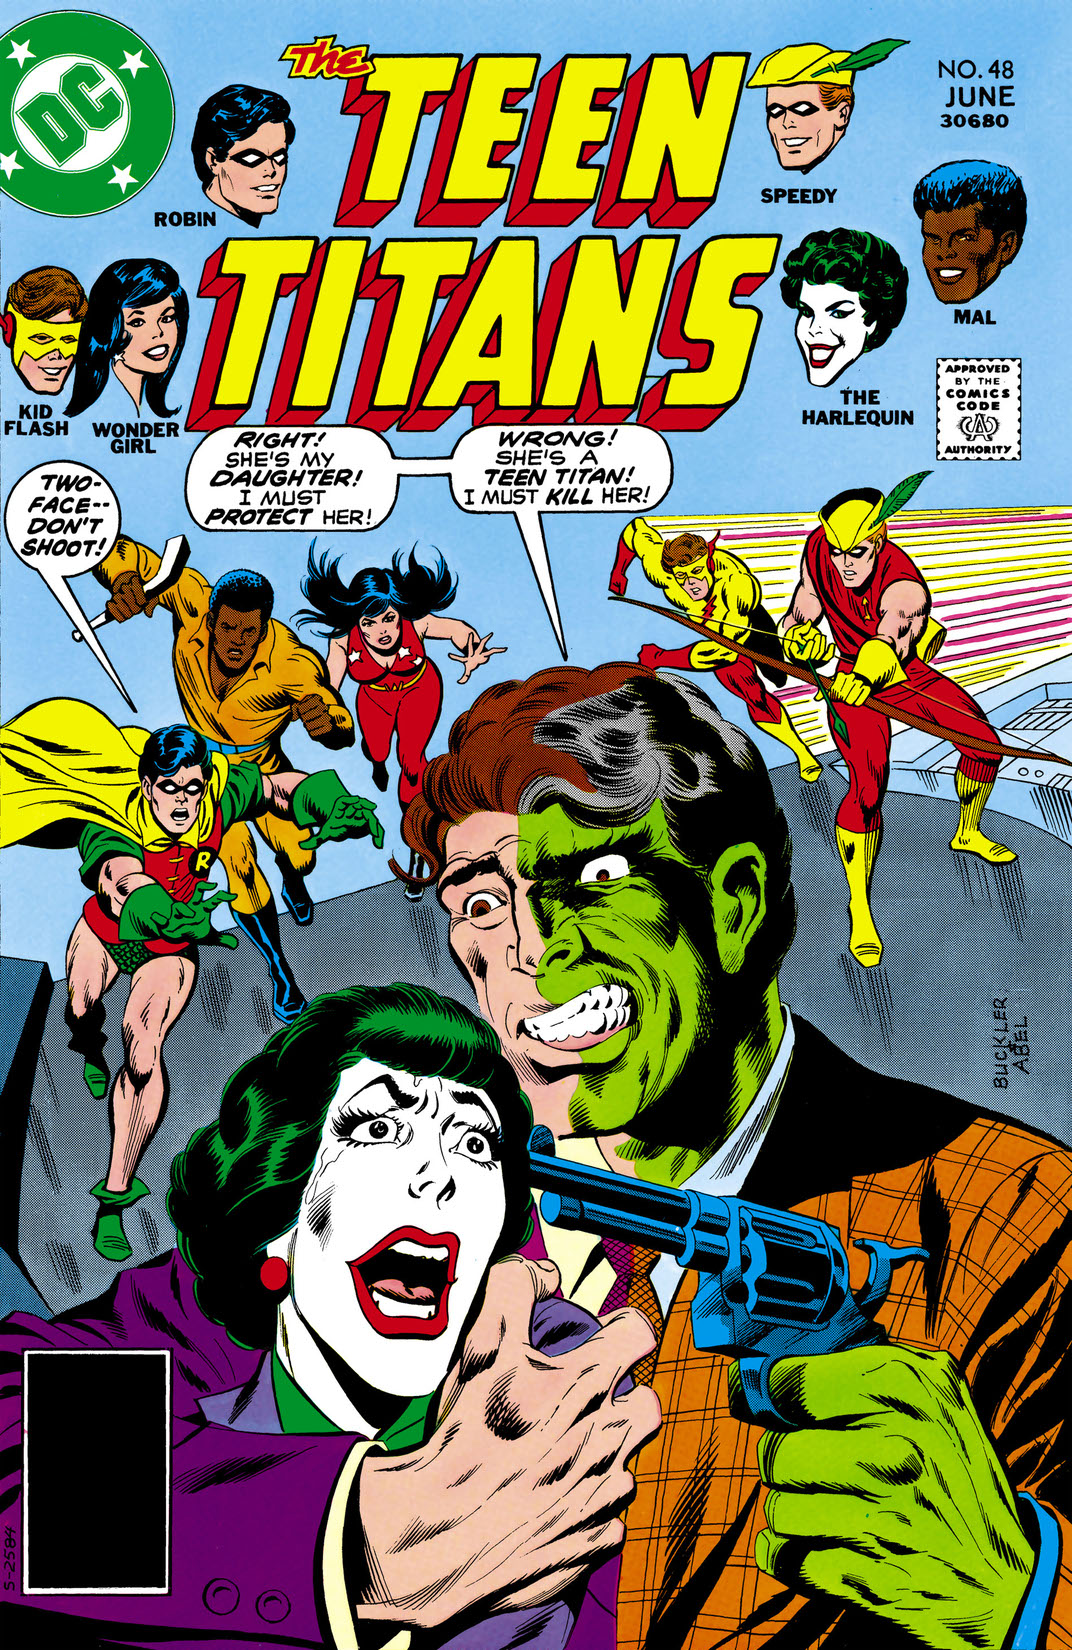 Teen Titans (1966-) #48 preview images